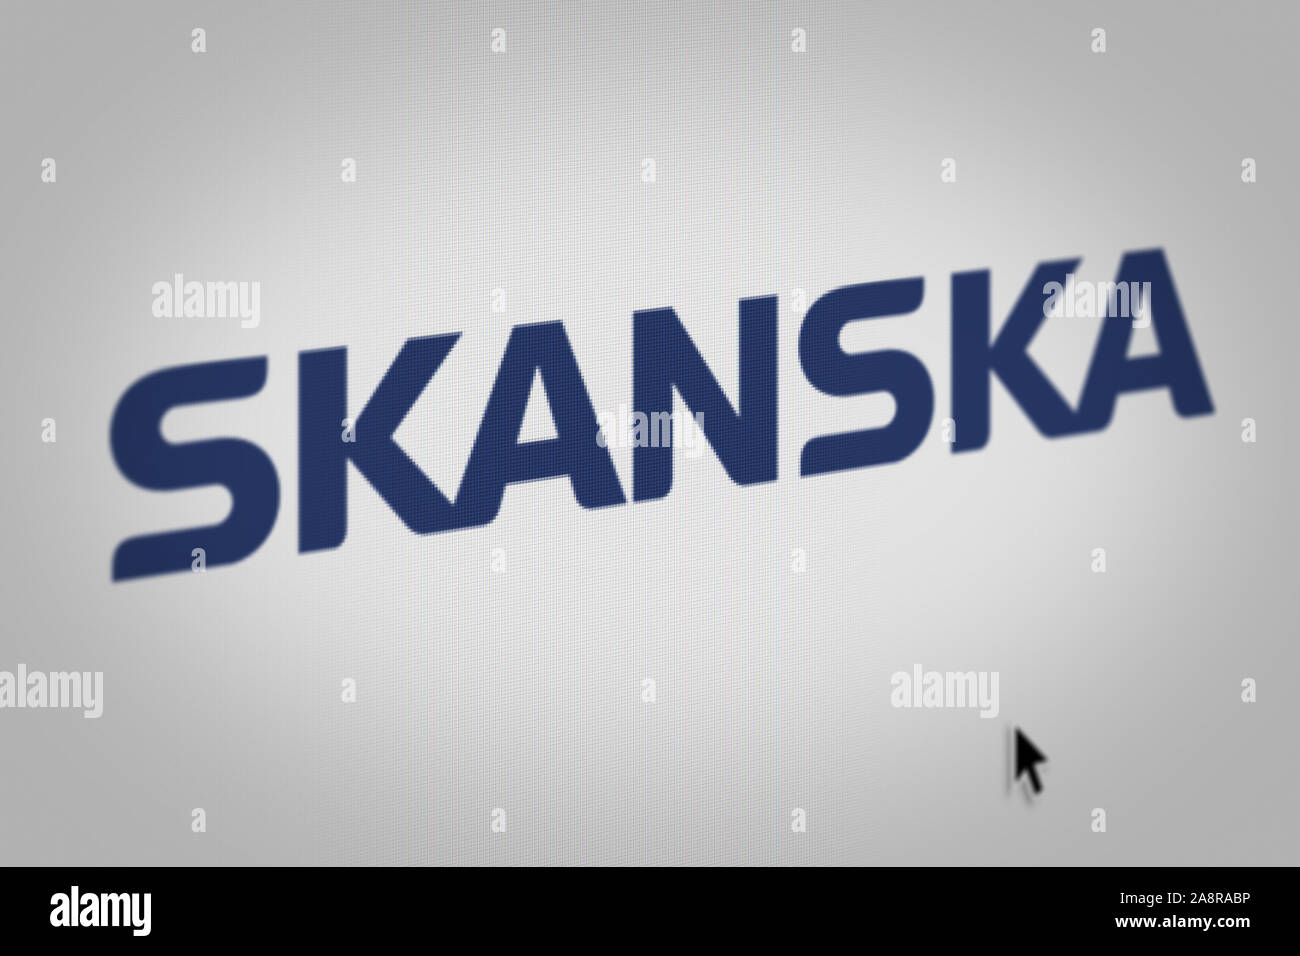 Logo of the public company Skanska displayed on a computer screen in close-up. Credit: PIXDUCE Stock Photo